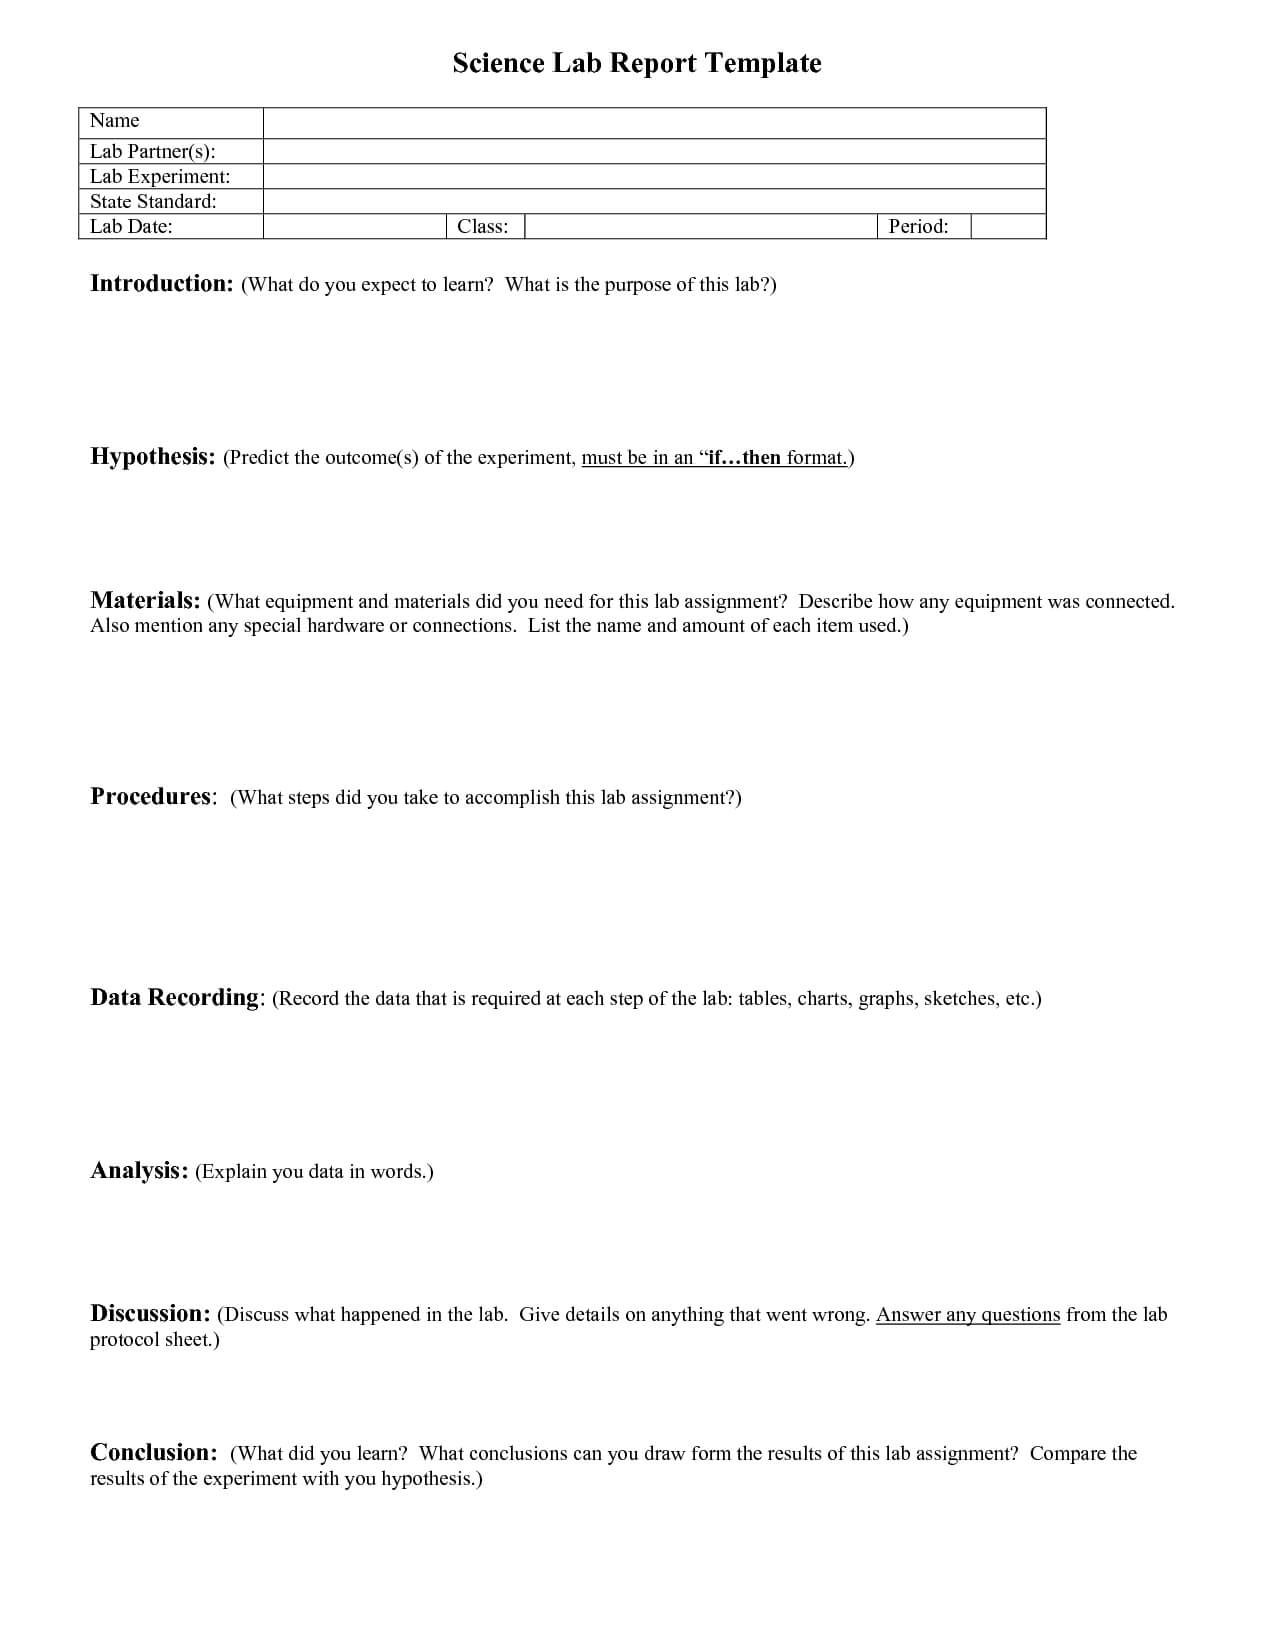 Lab Report Outline | Science Lab Report Template | Lab Within Science Experiment Report Template